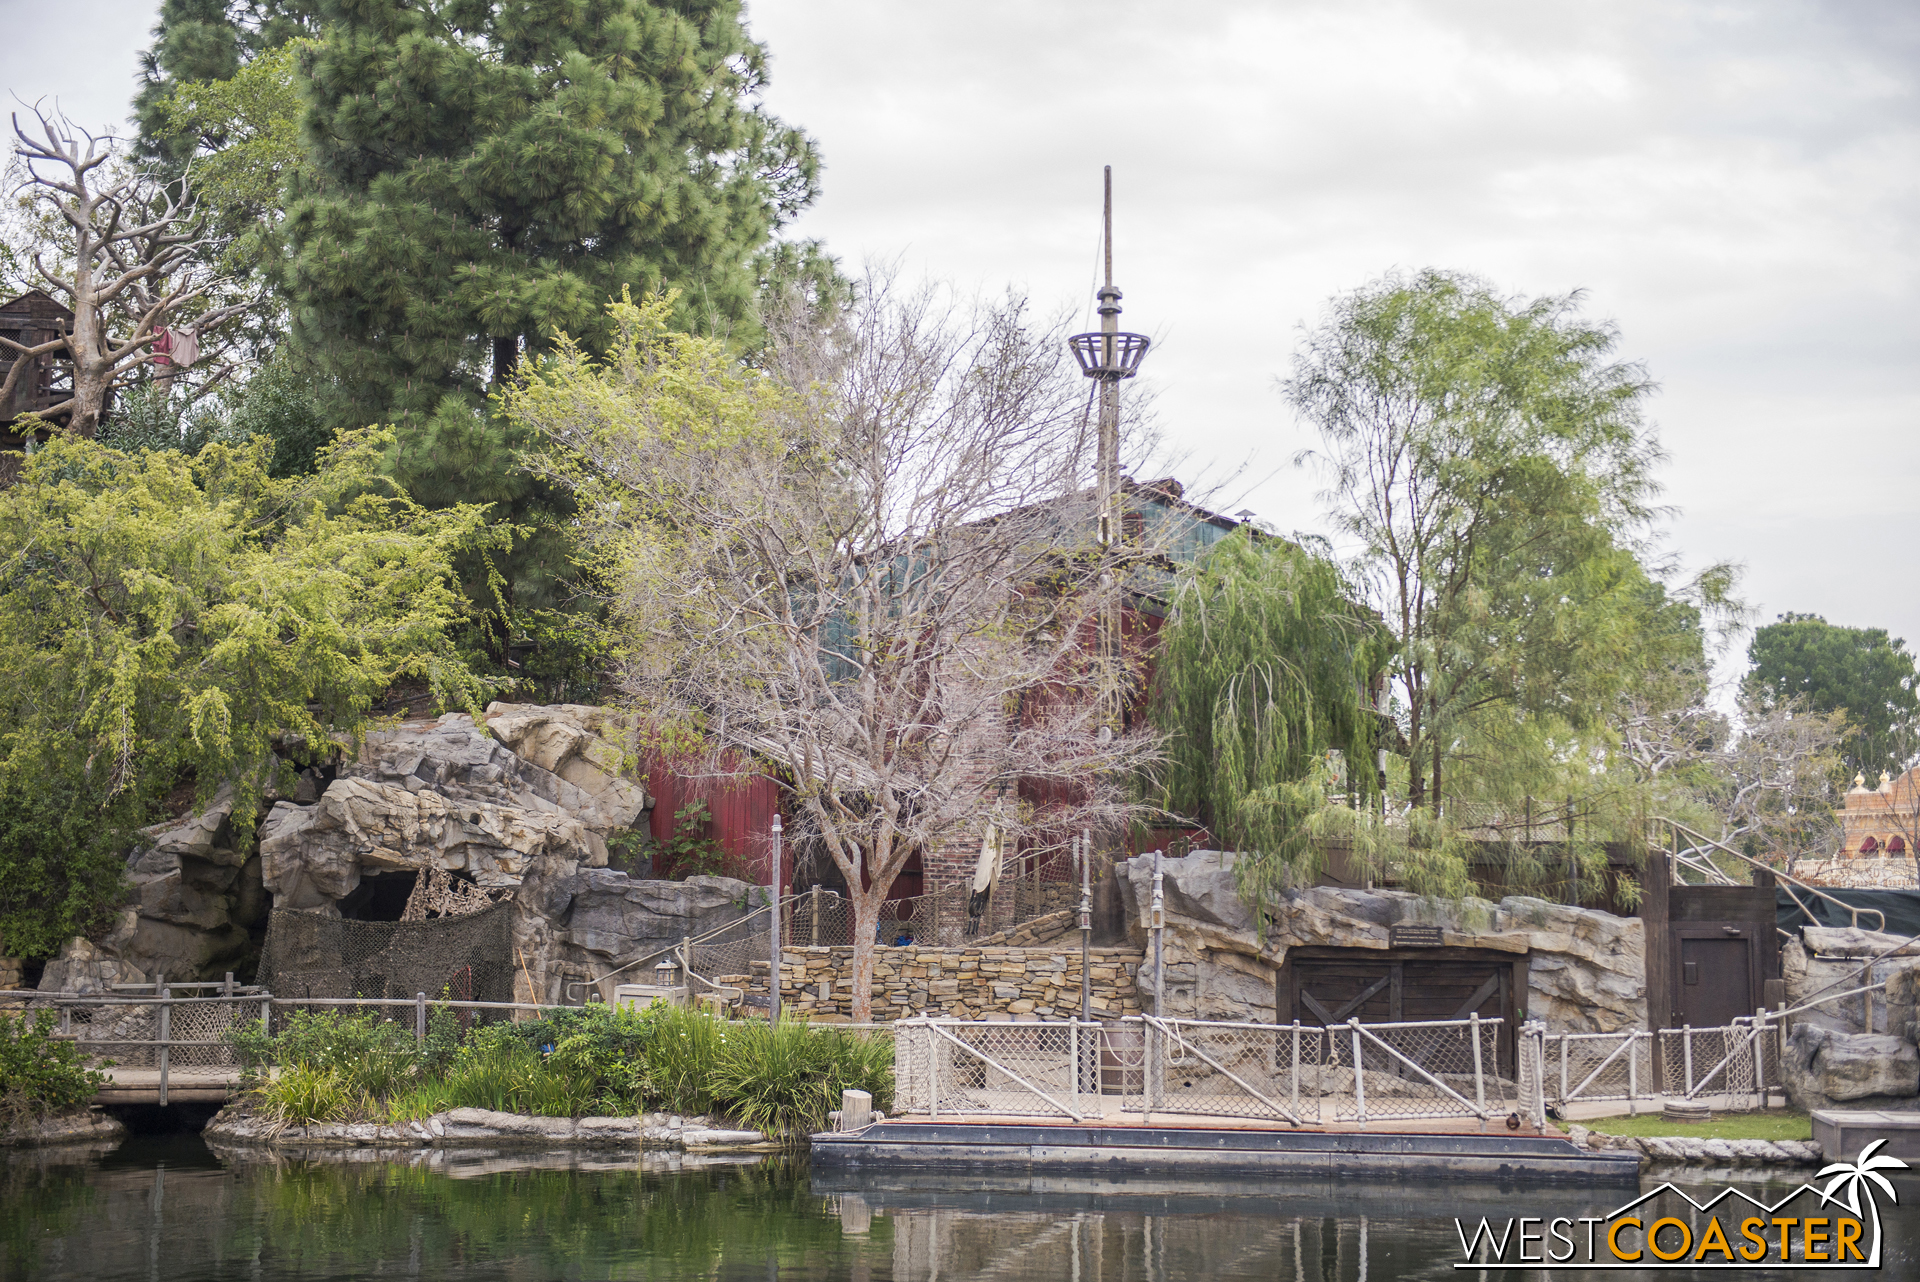  Tom Sawyer's Island has its own crow's nest as a pairing with the Columbia's. 